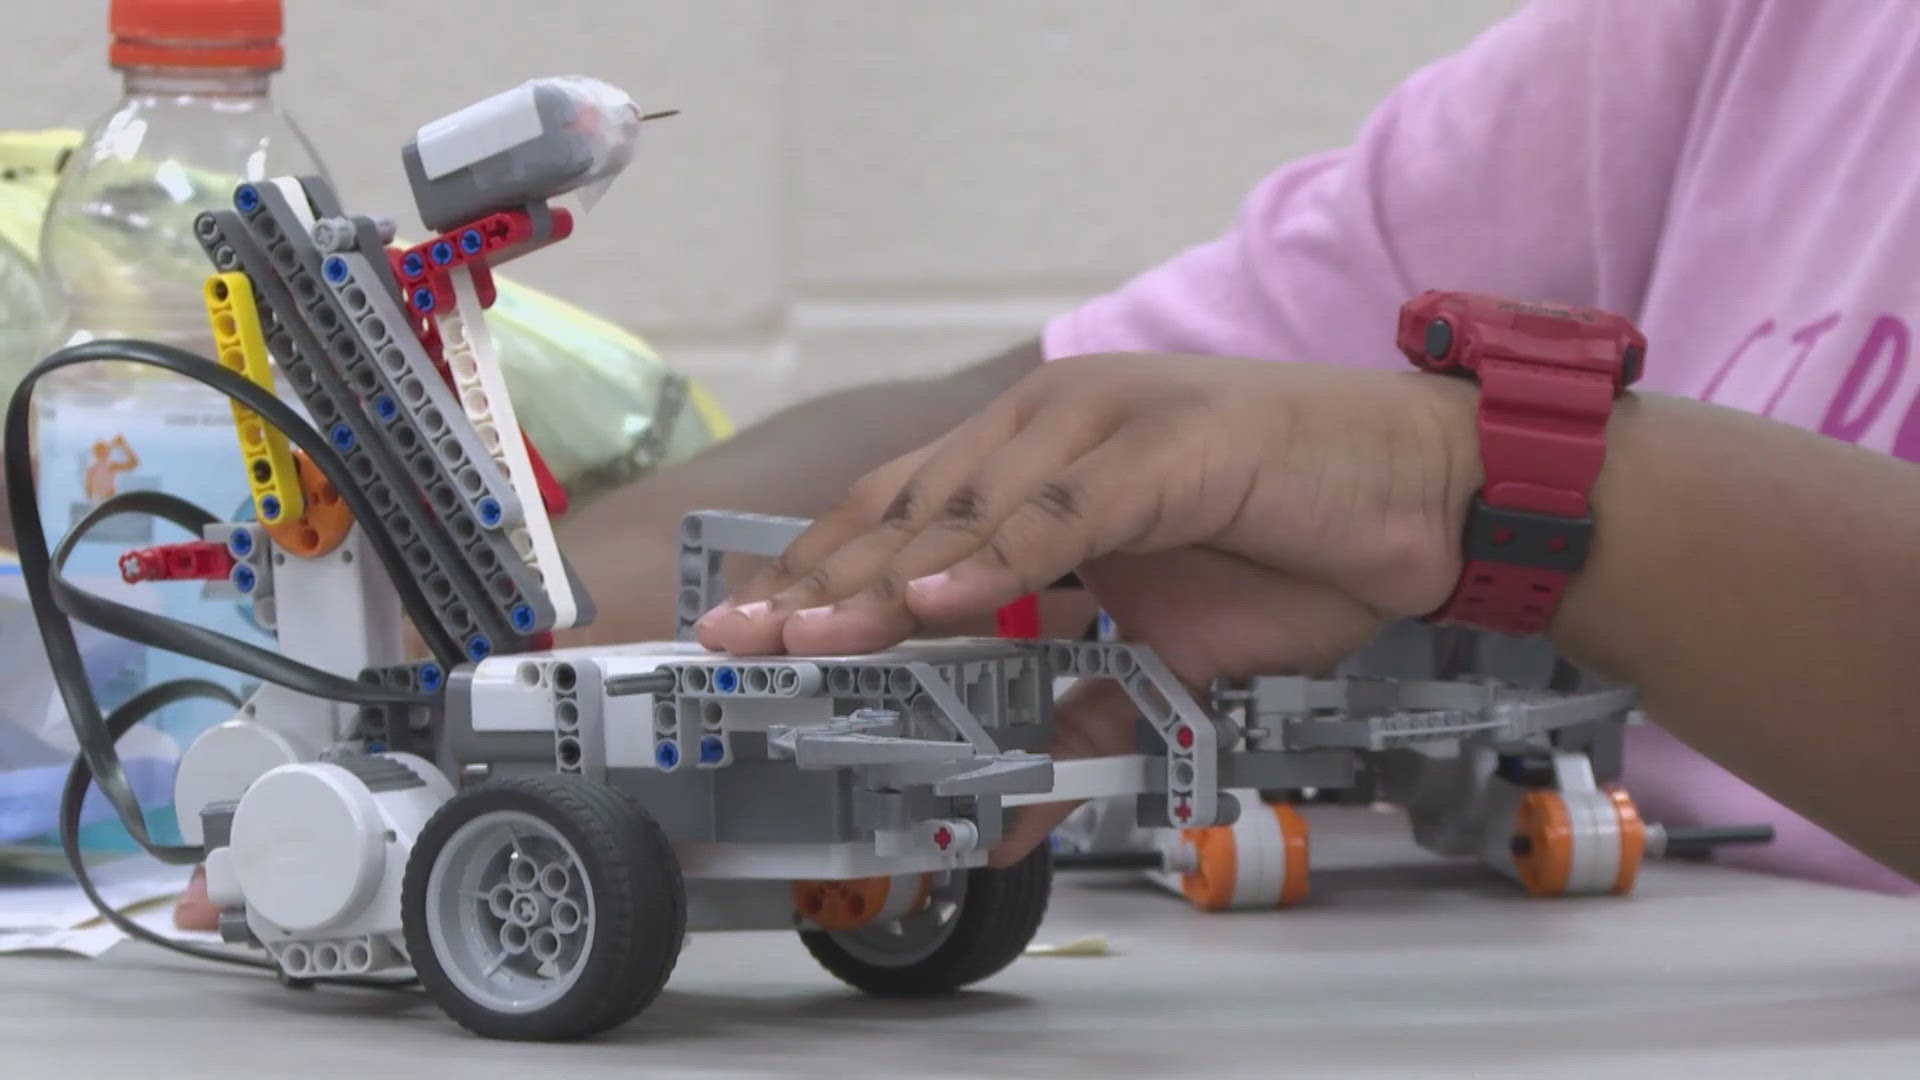 The Robotics program at Stella Walsh and EJ Kovacic Recreation Centers teaches kids 8 to 17 years old how to build and control robots to expose them to STEM.